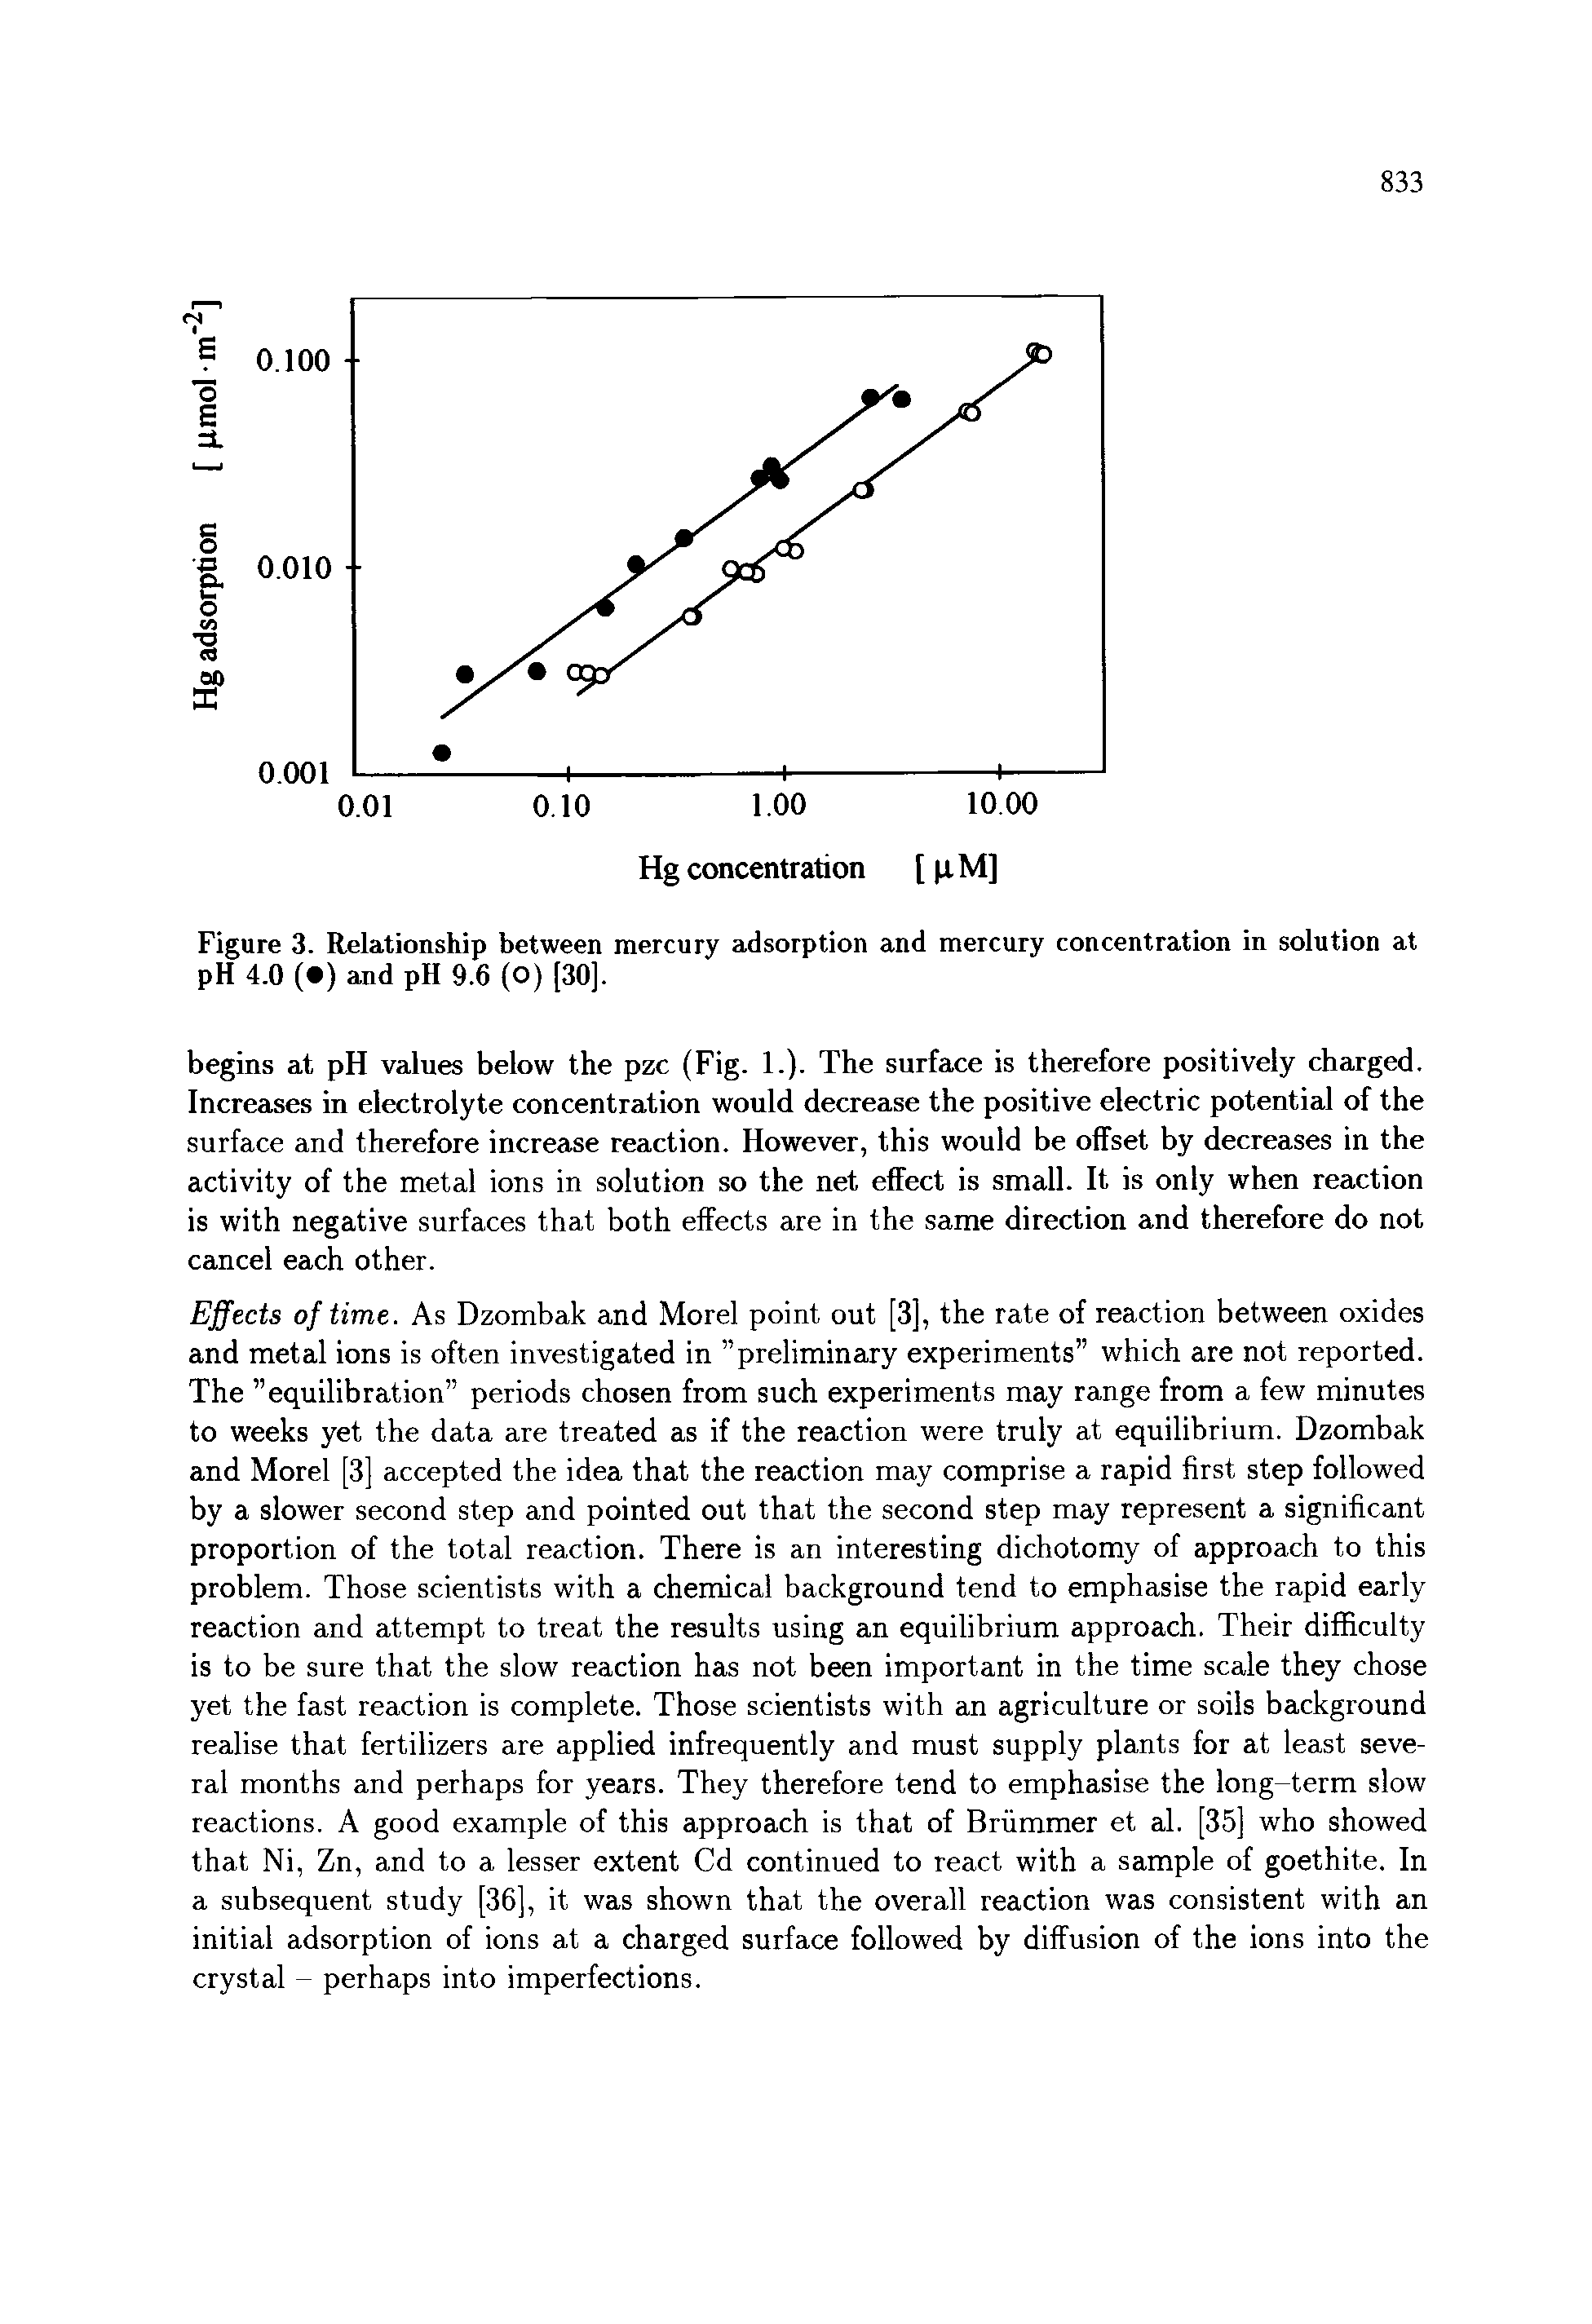 Figure 3. Relationship between mercury adsorption and mercury concentration in solution at pH 4.0 ( ) and pH 9.6 (O) [30].